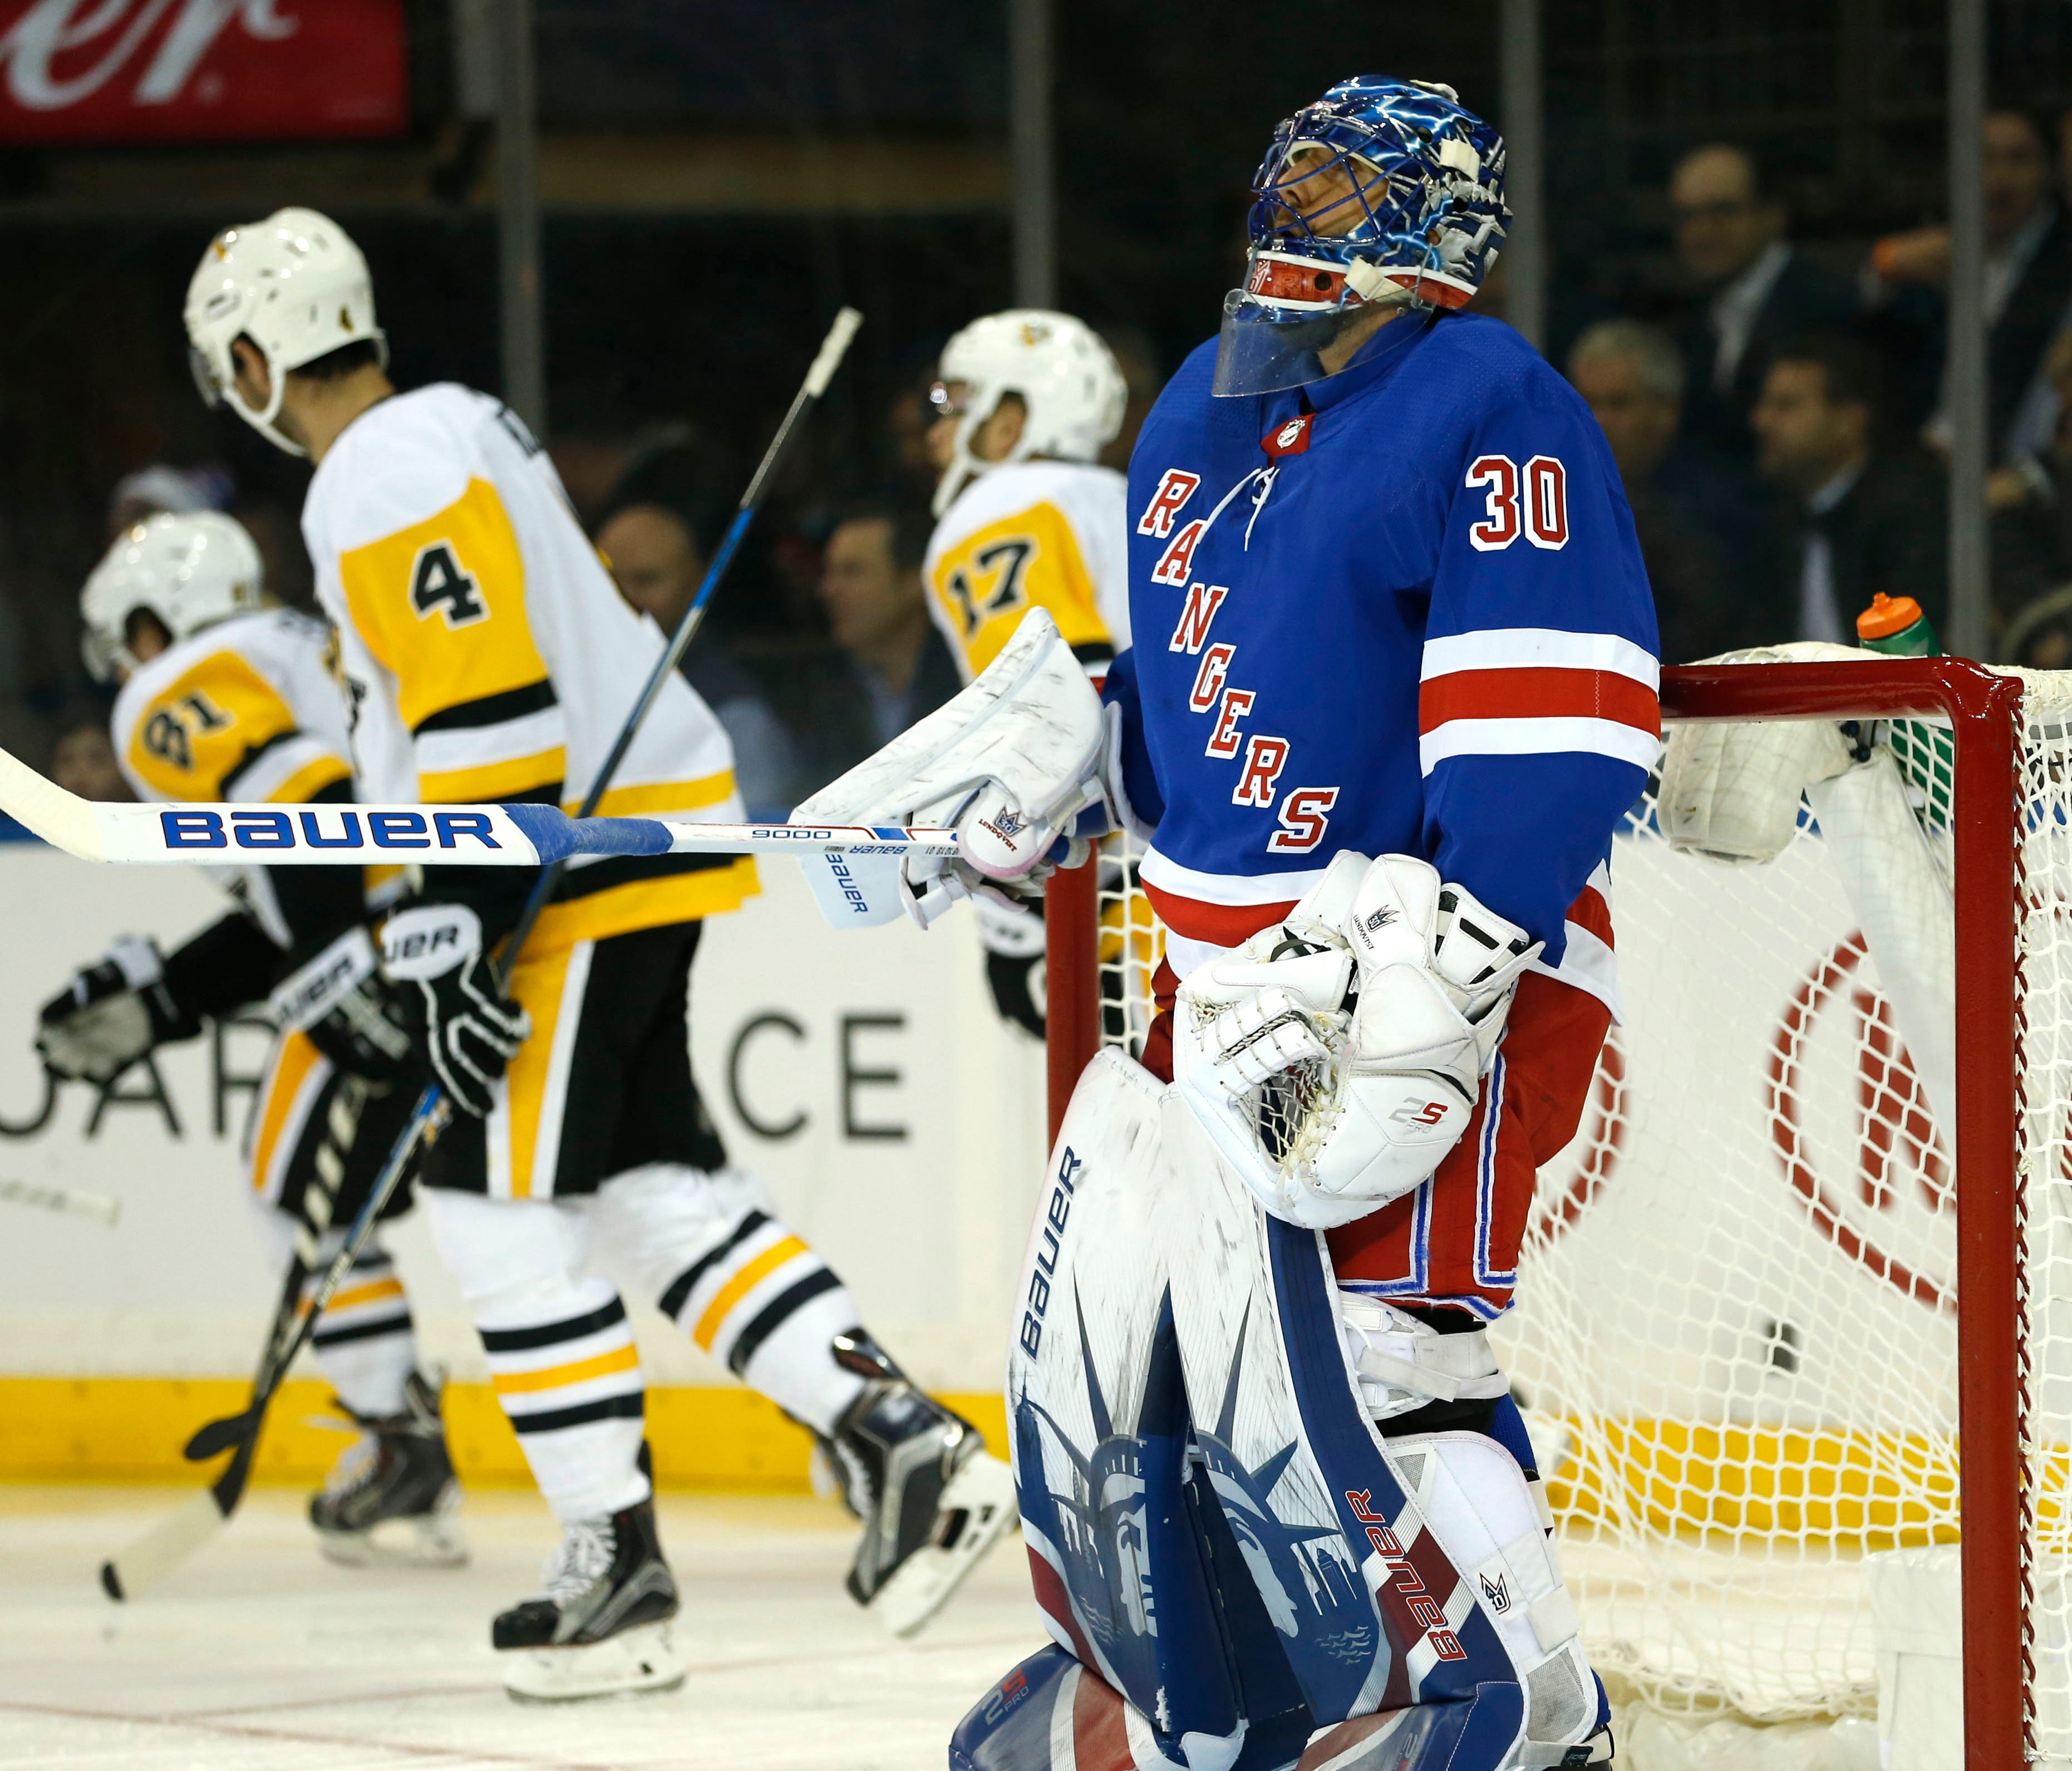 New York Rangers goalie Henrik Lundqvist reacts after giving up a goal to Pittsburgh Penguins right wing Phil Kessel (81) during the first period at Madison Square Garden on Tuesday.